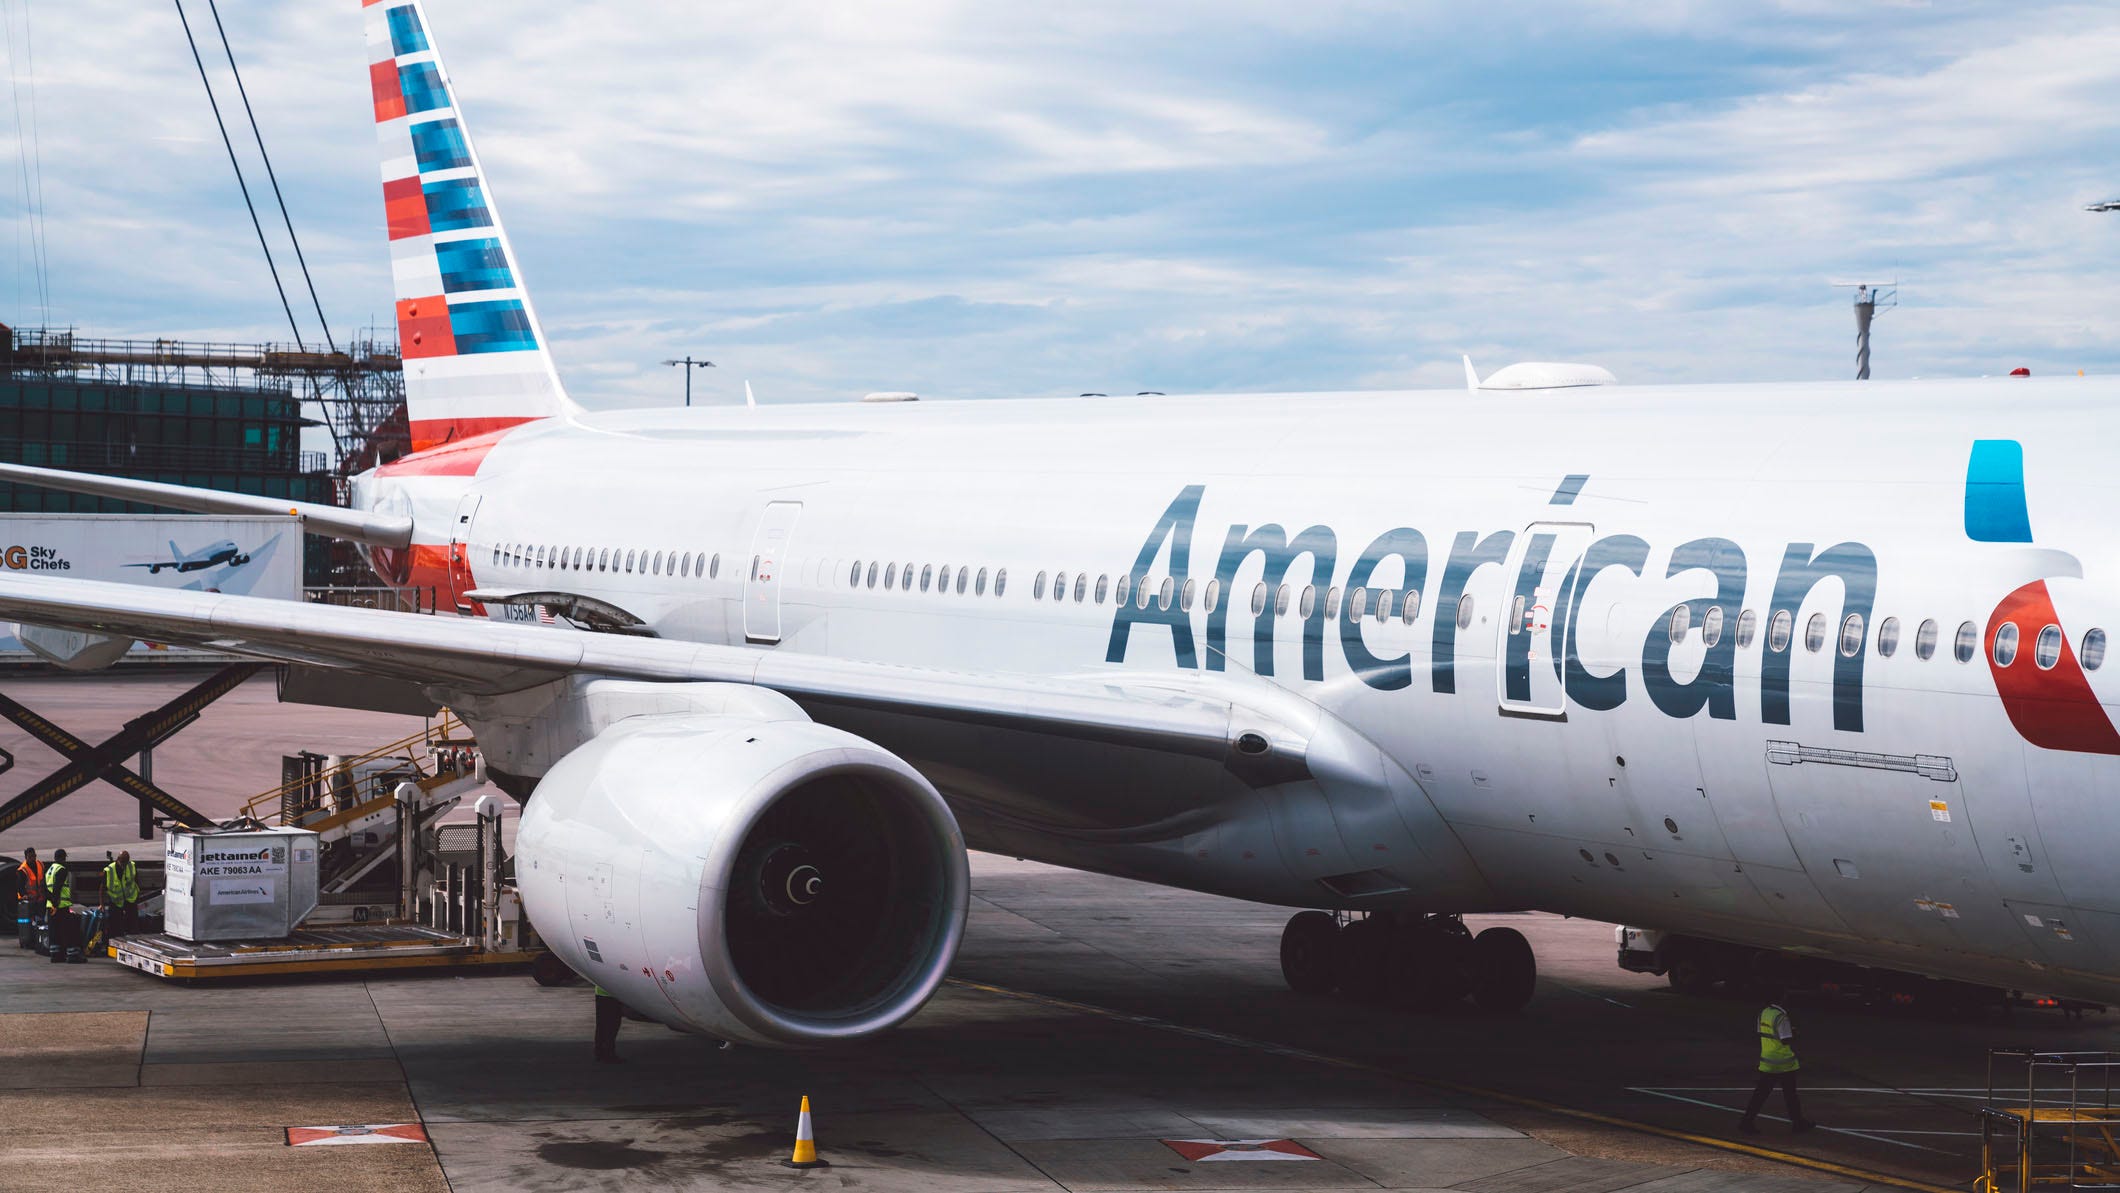 American Airlines cancels flight after crew member tests positive for COVID